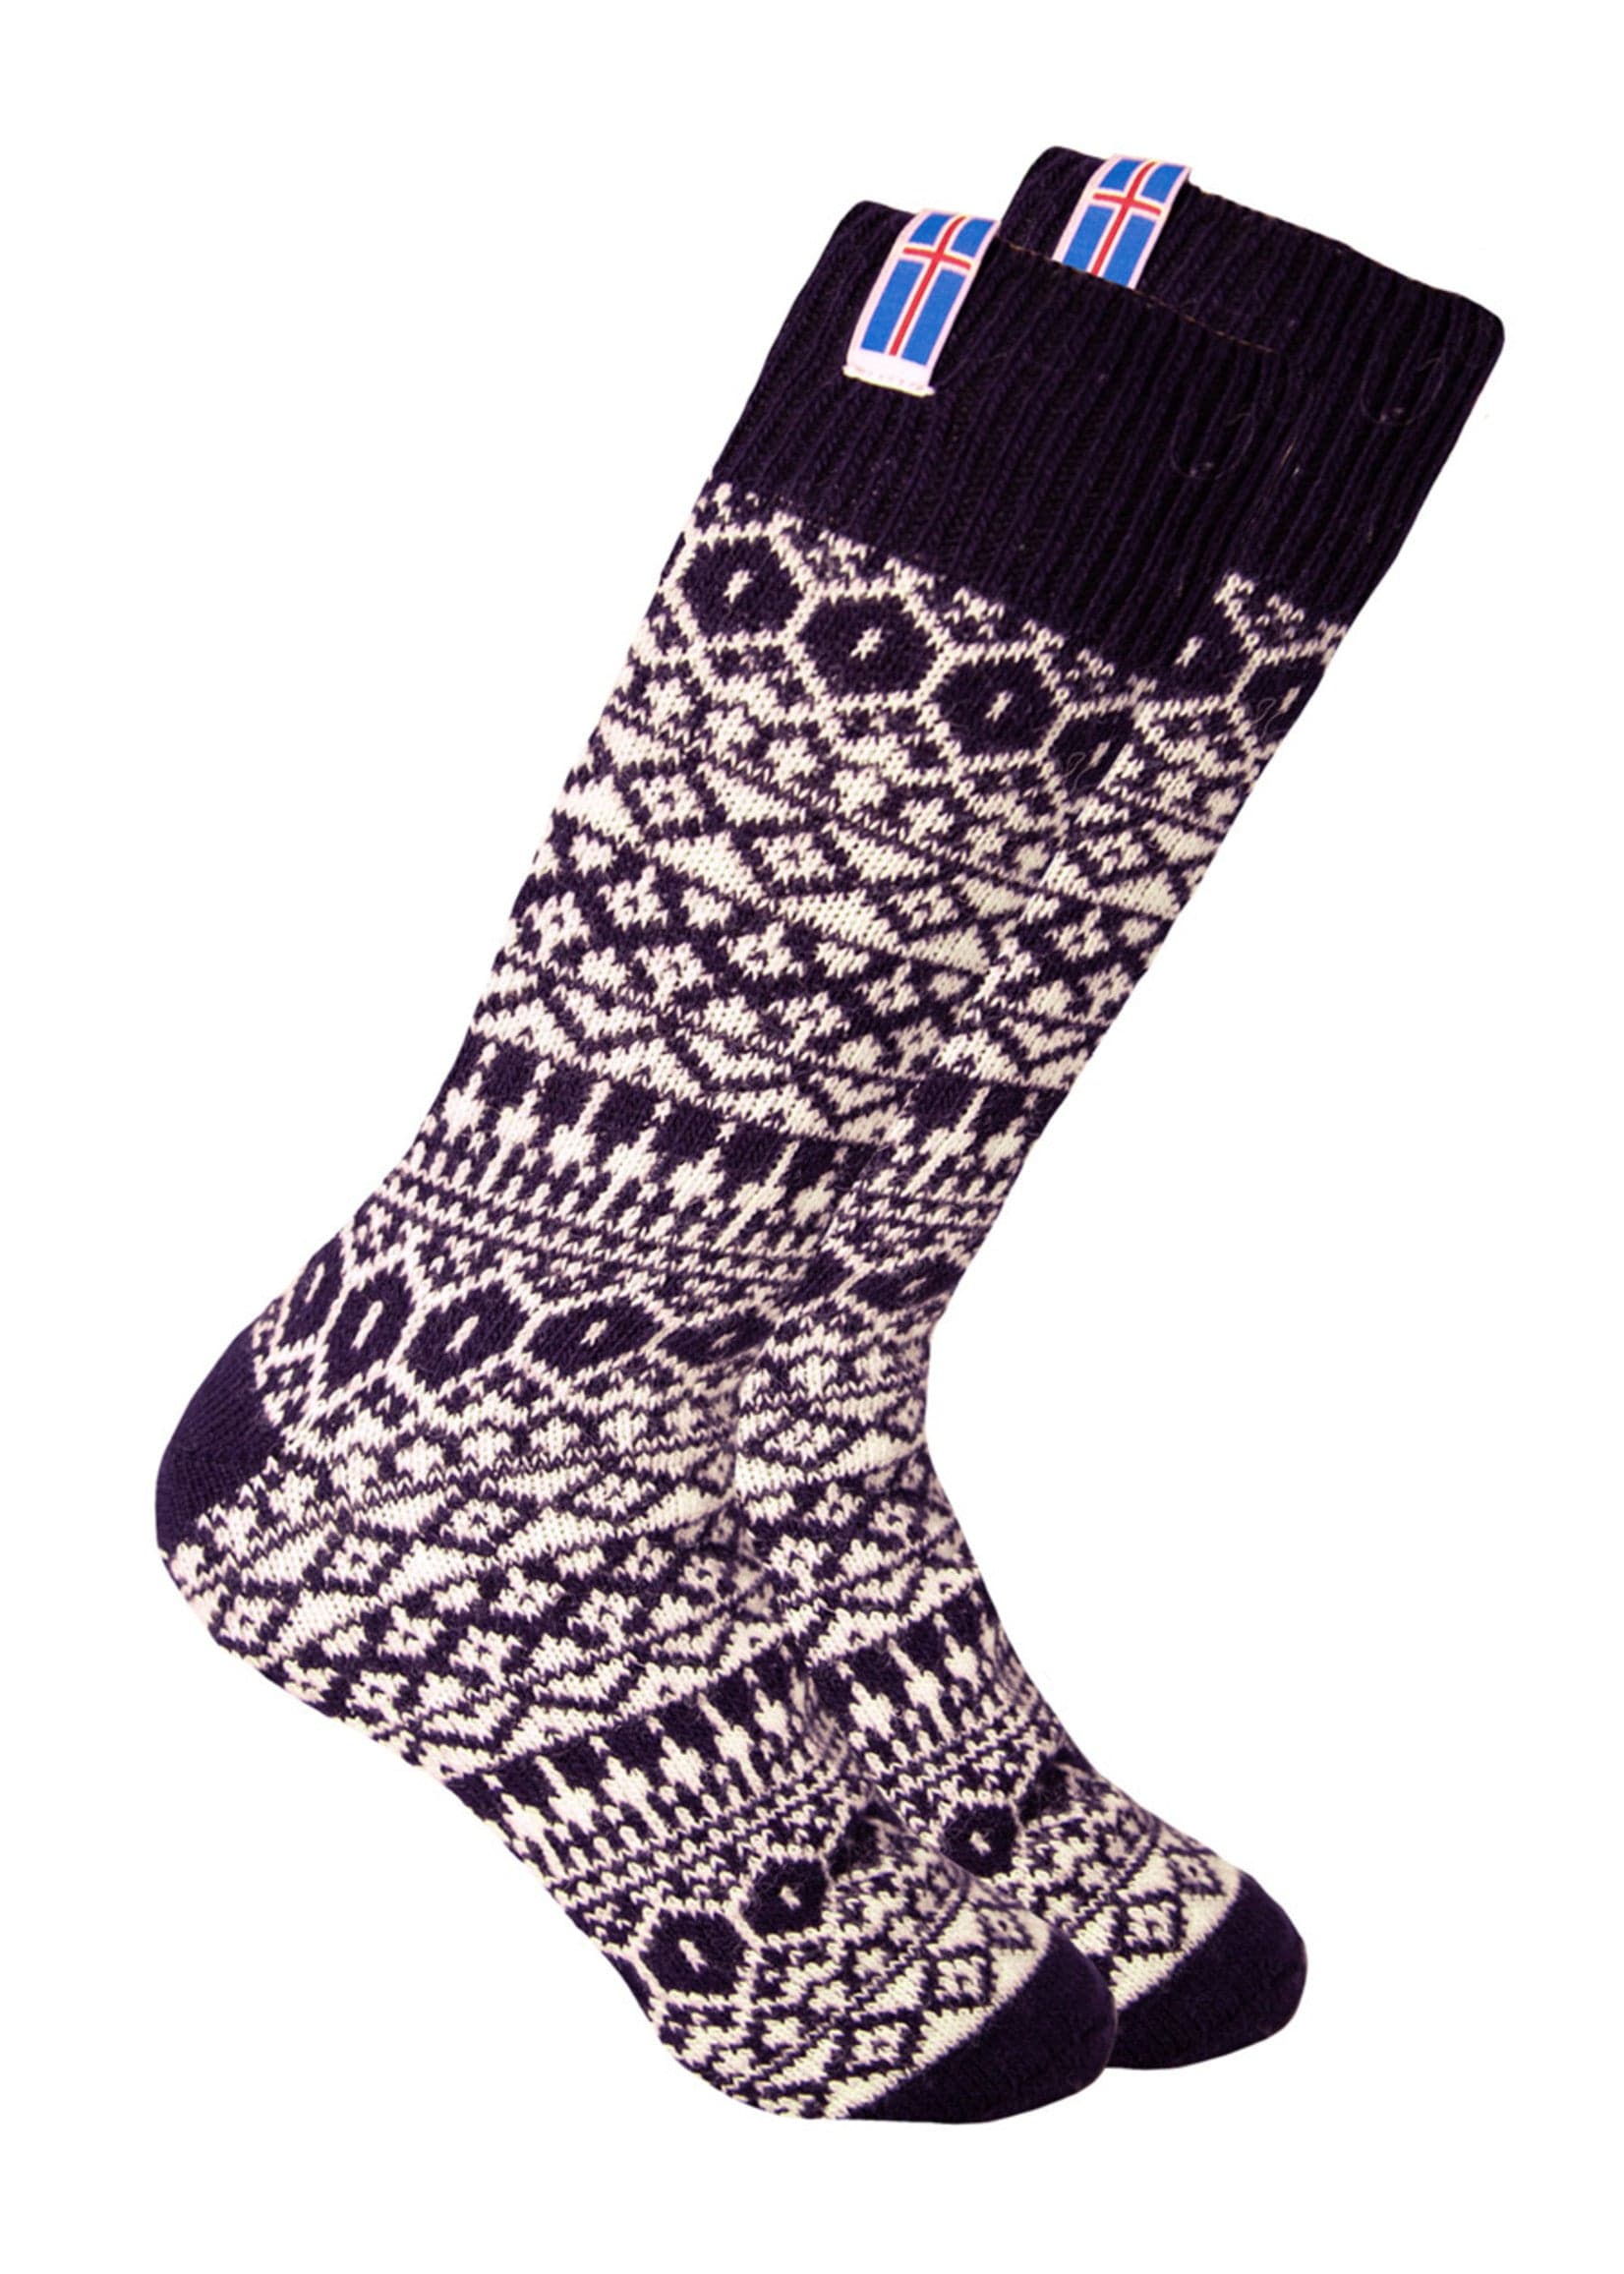 Norfinde Norwegian wool socks with a small woven Åland flag, dark blue